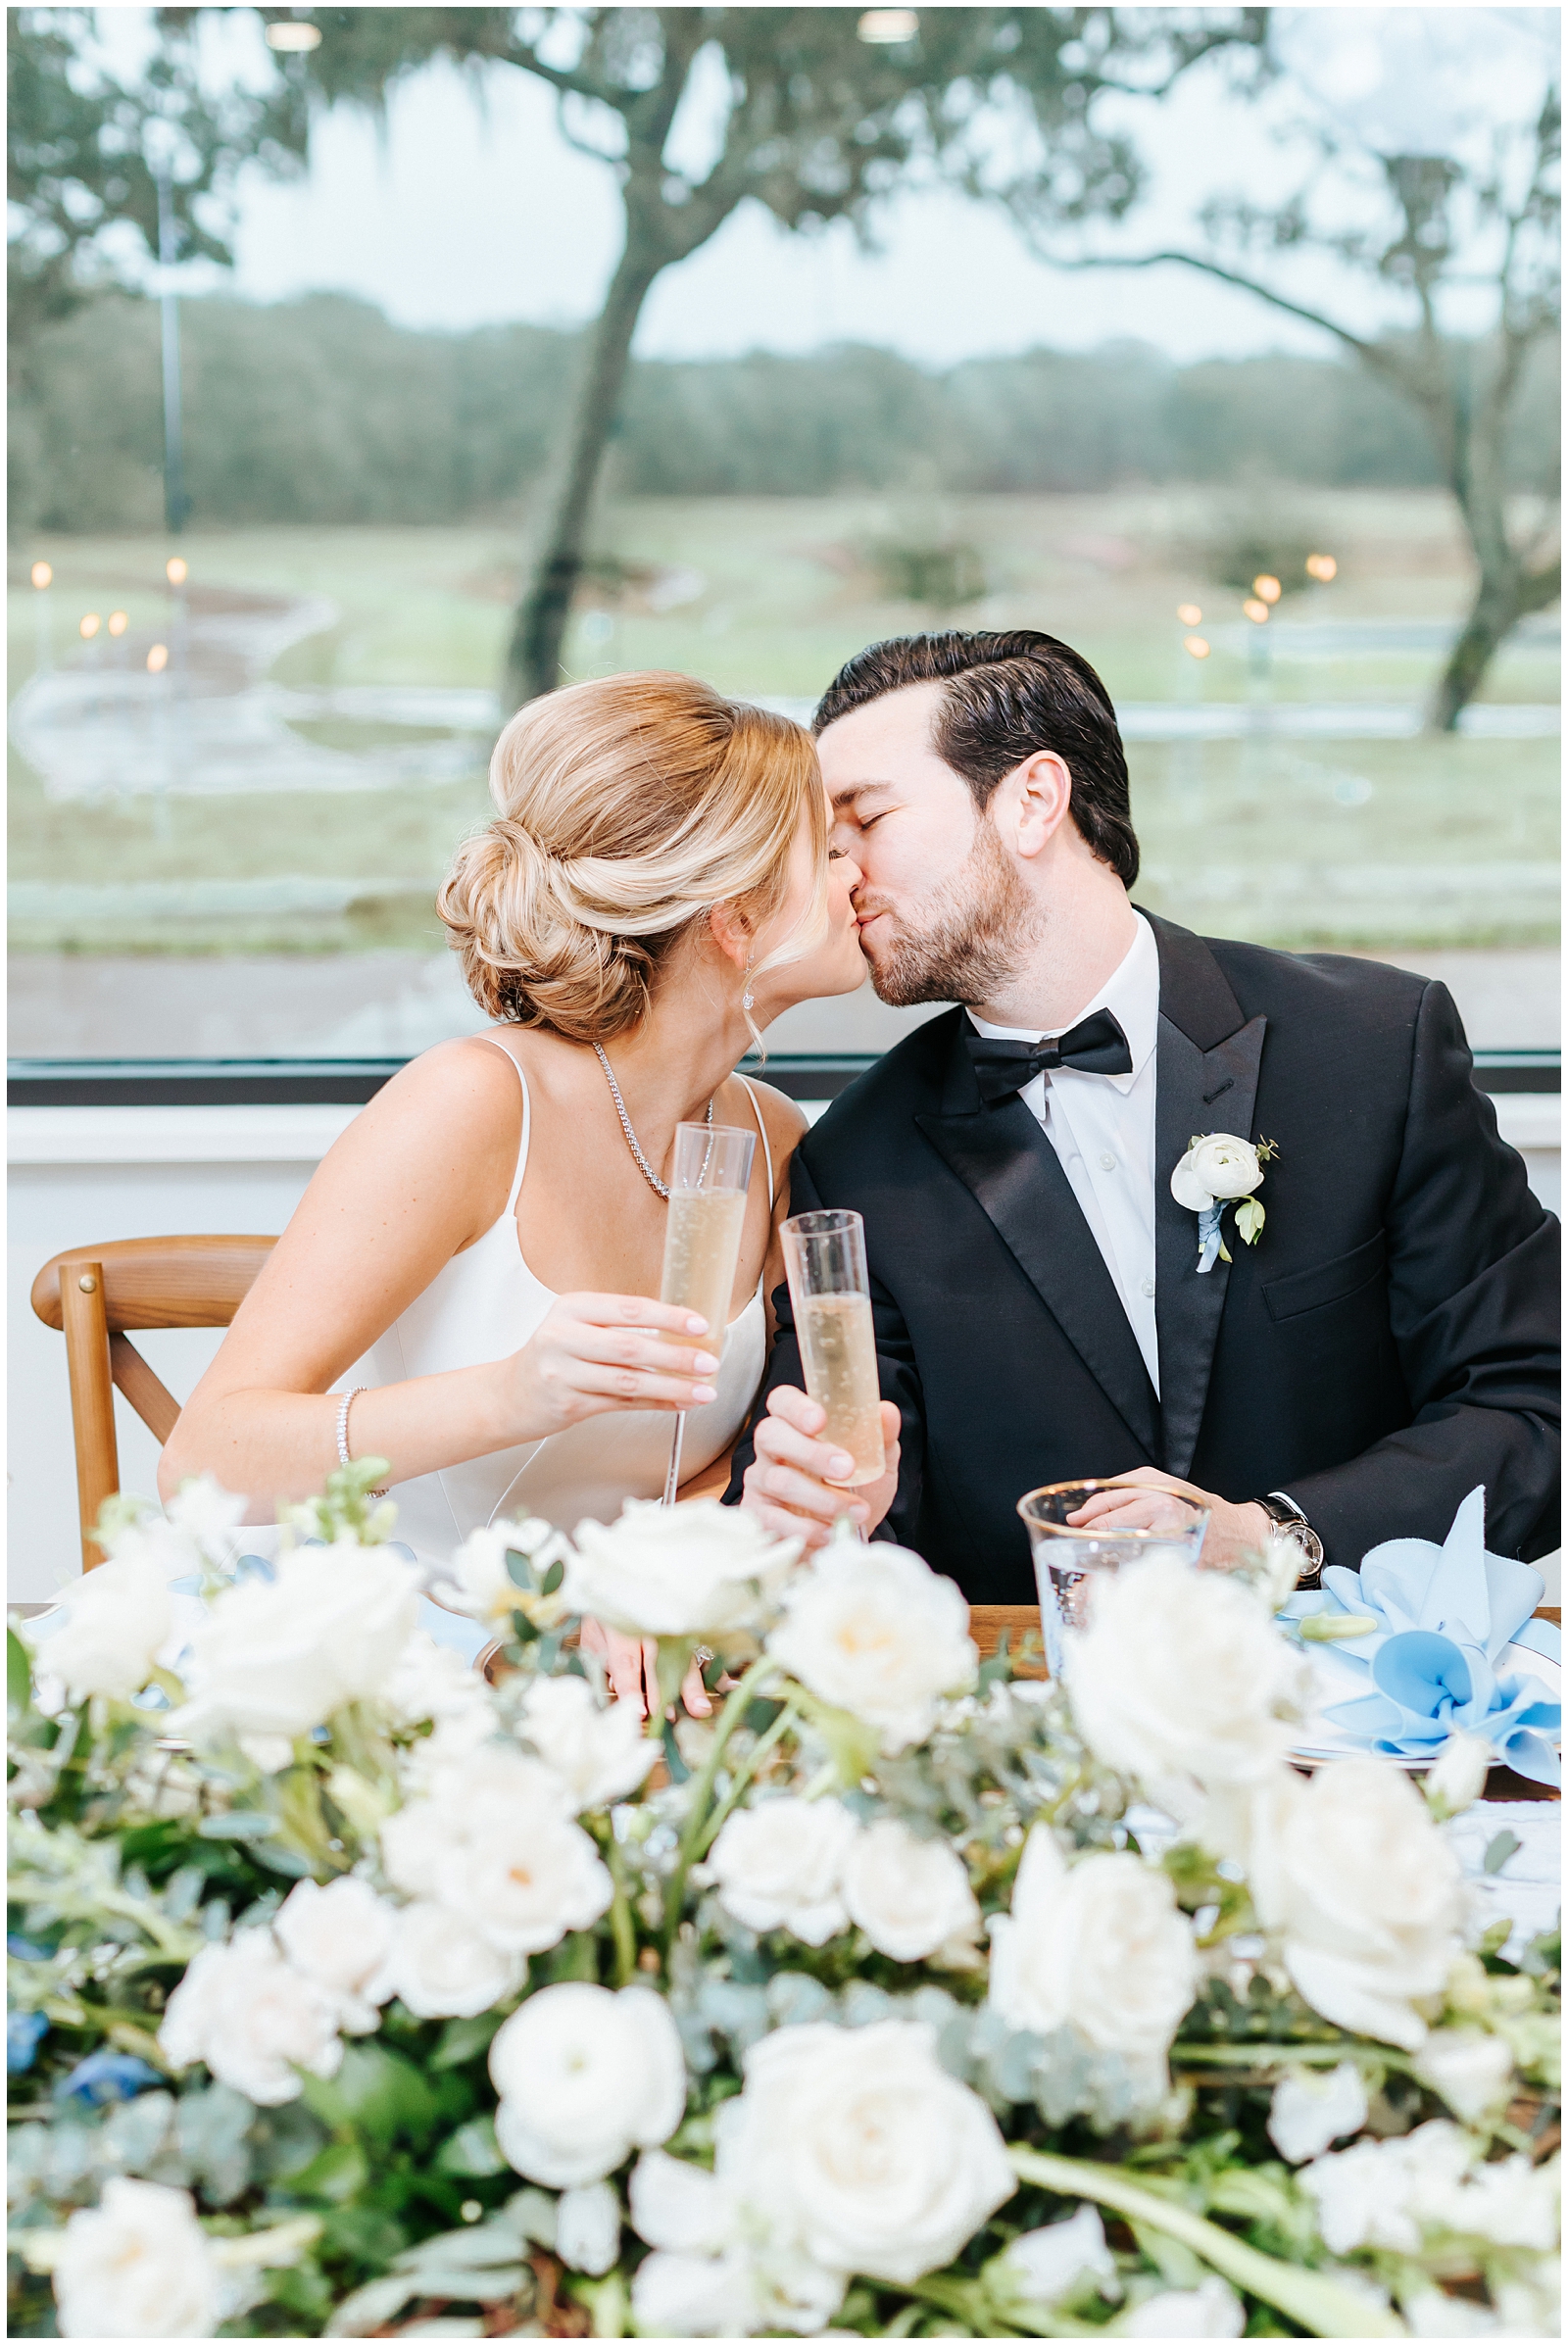 Bride and Groom Kissing with a Champagne Toast at Sweetheart Table at Simpson Lakes Wedding 